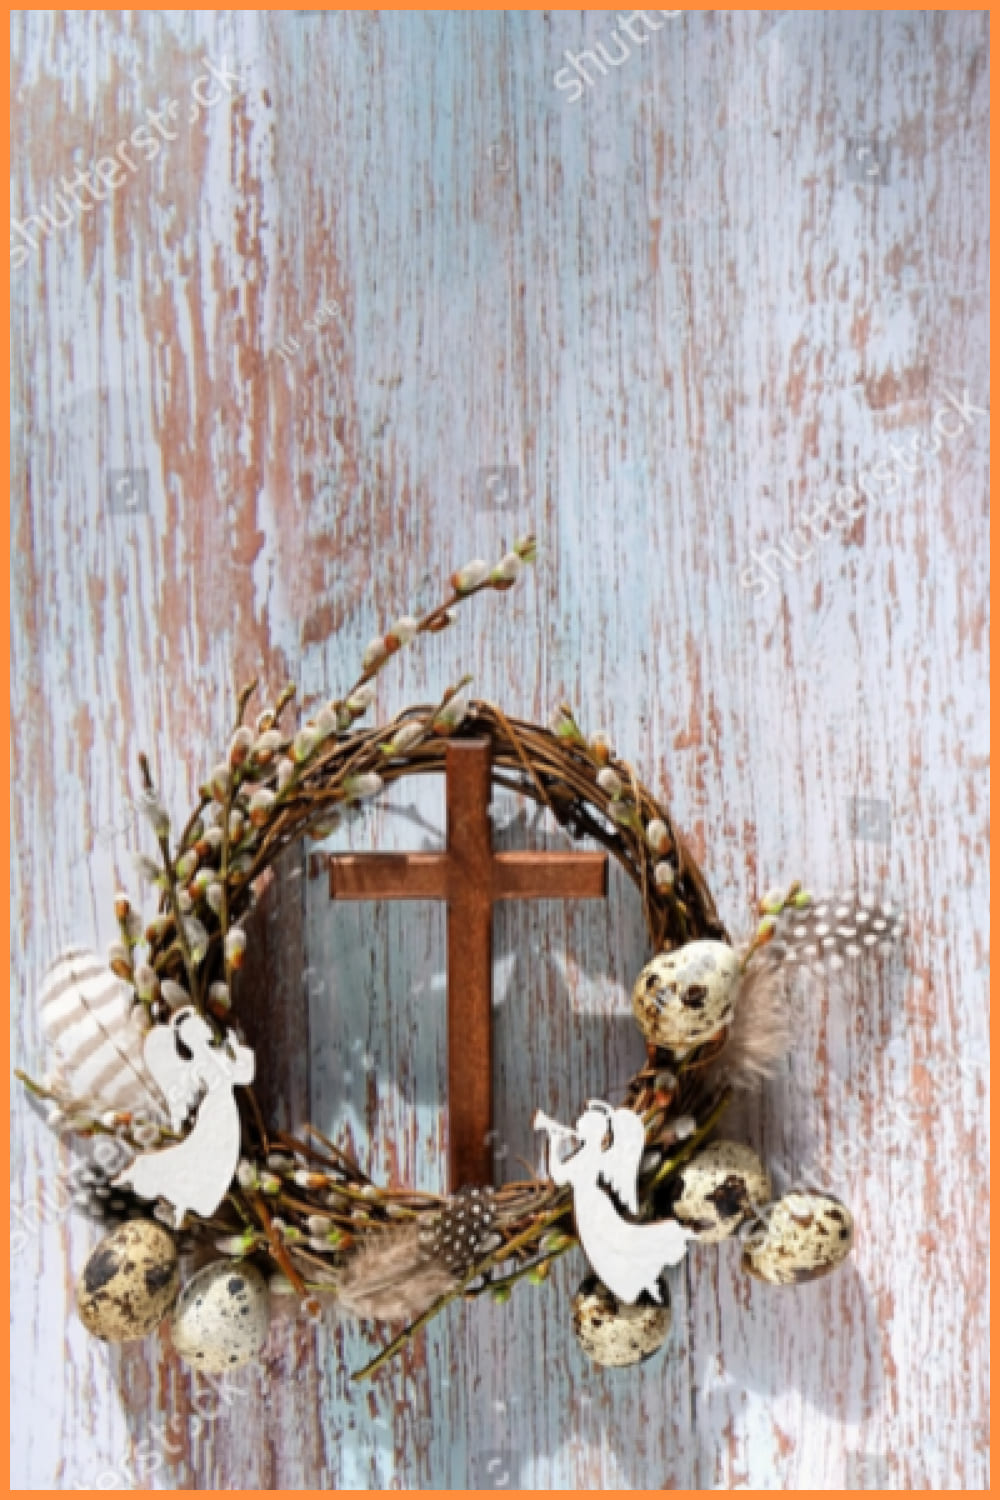 pussy willow wreath, eggs, cross and decorative angels on rustic wooden background.